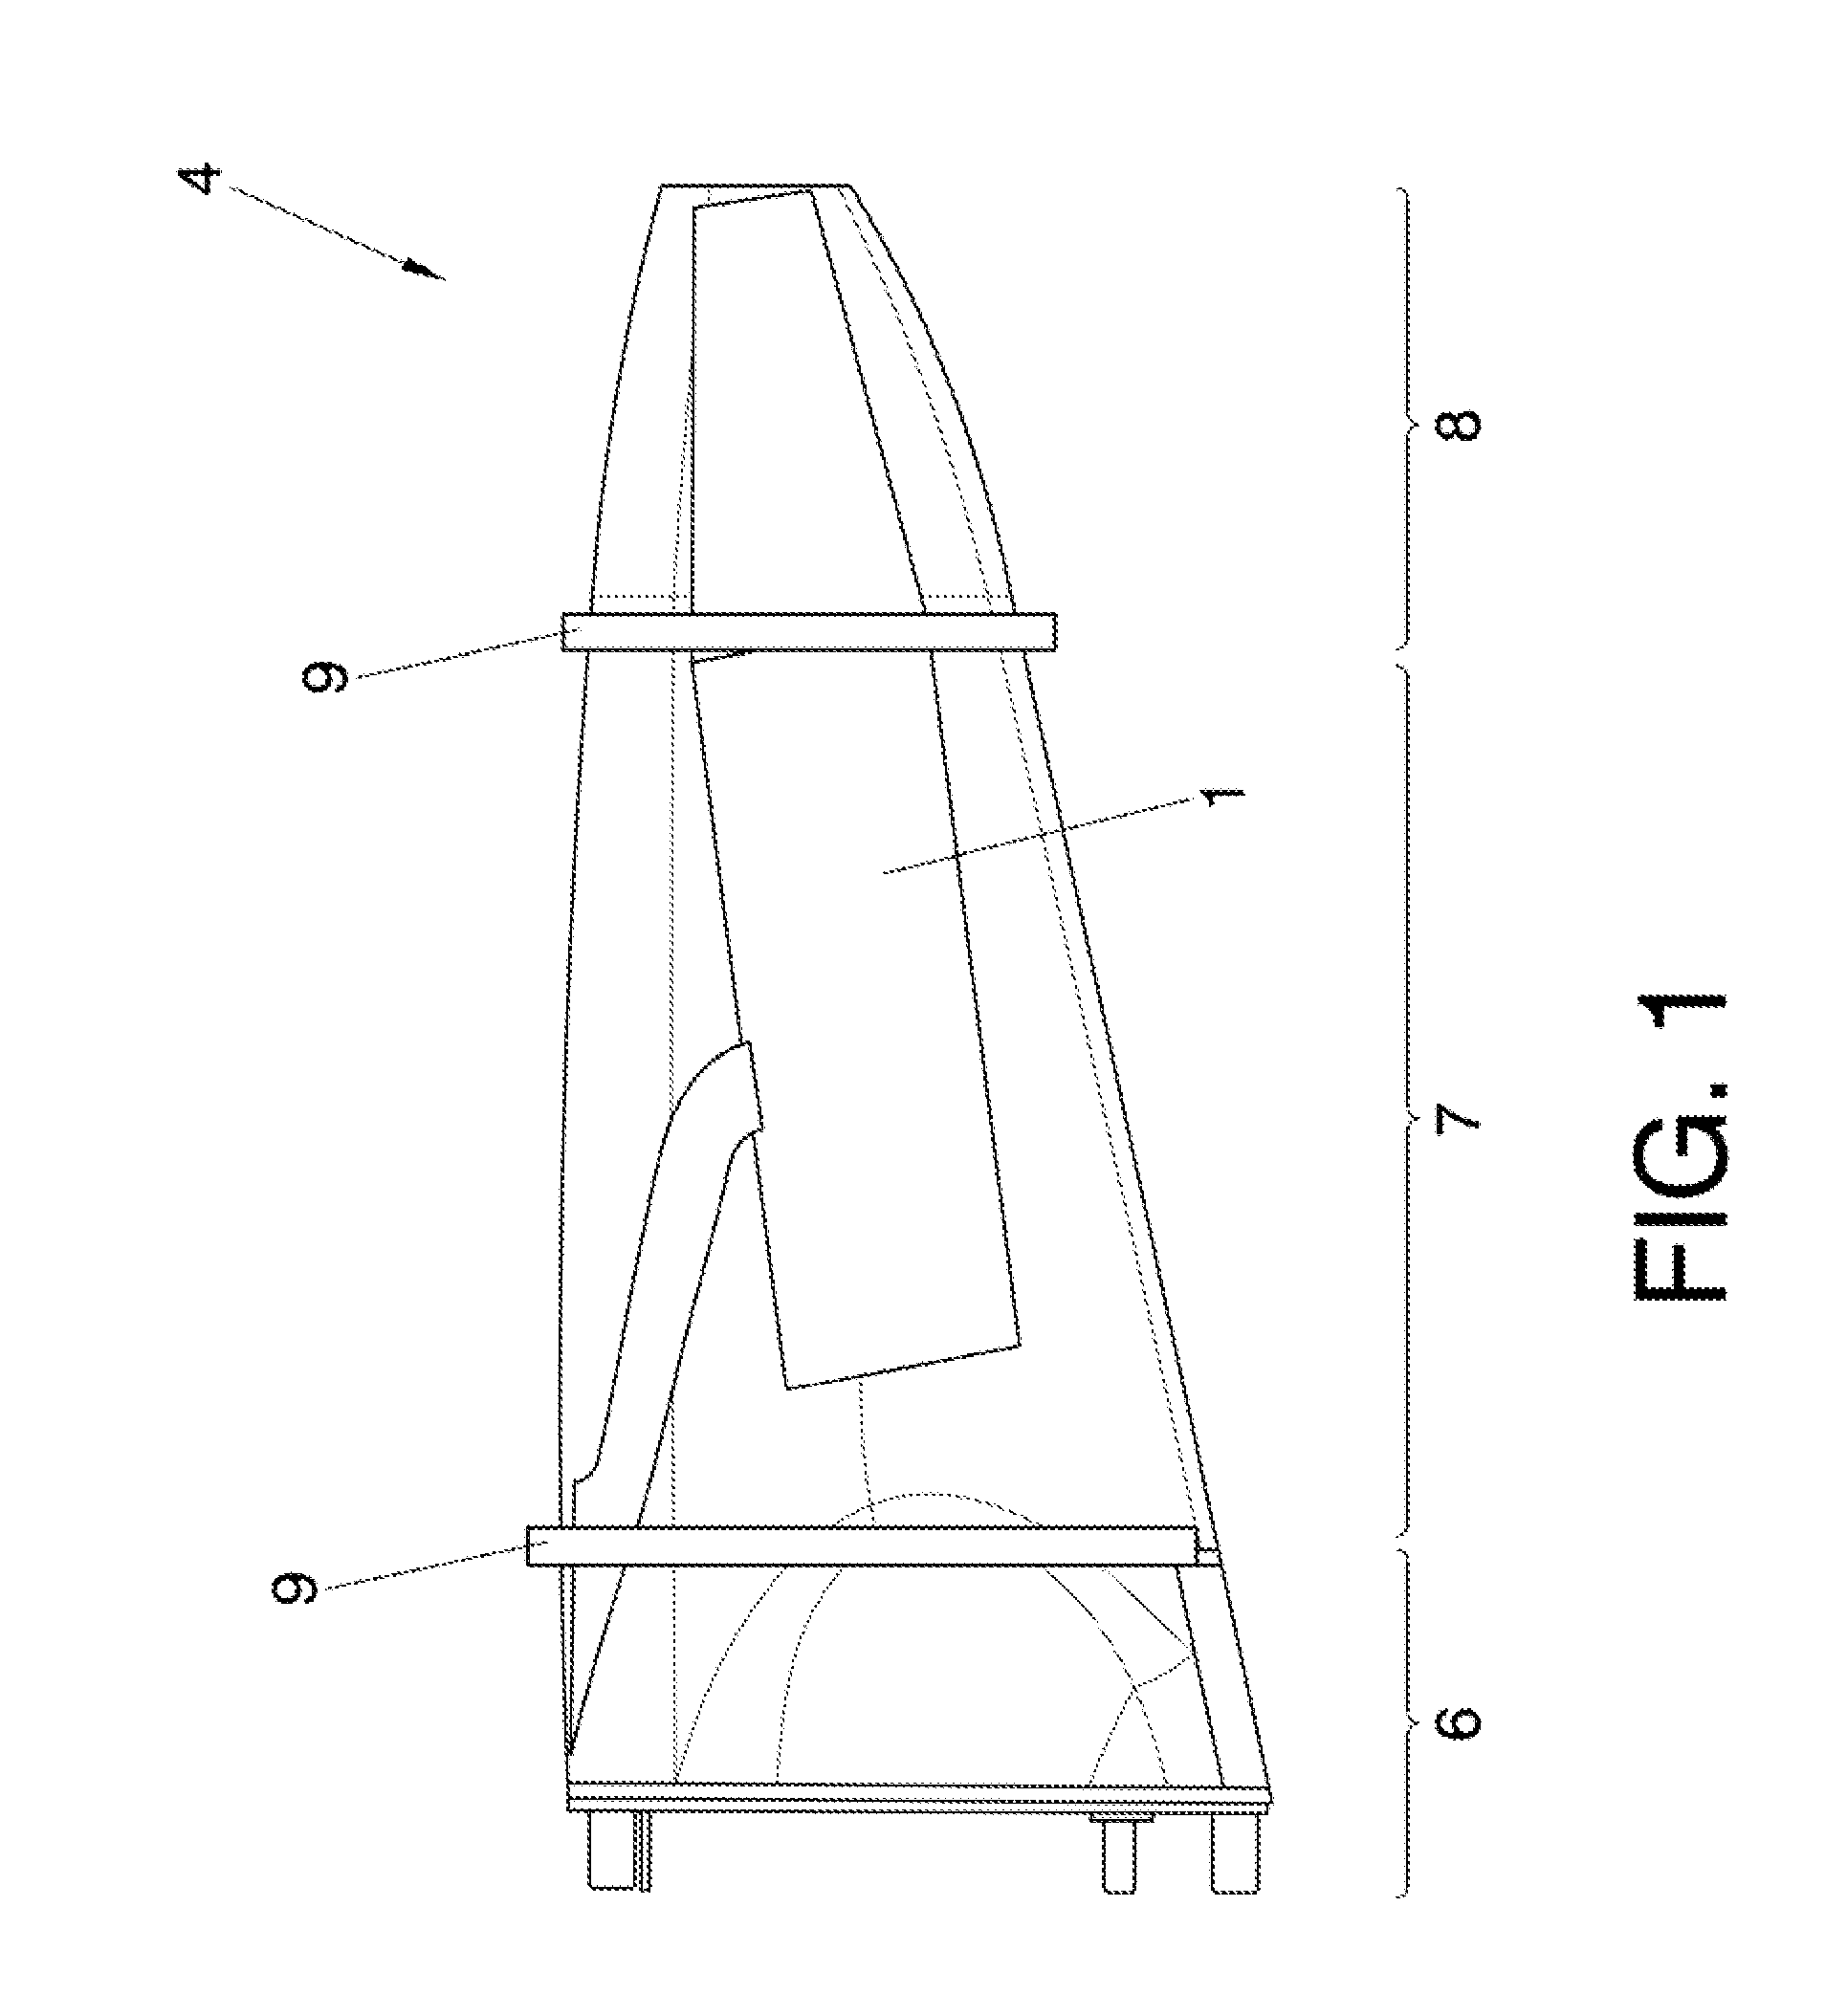 Configuration of a rear fuselage tail cone of an aircraft with an auxiliary power unit